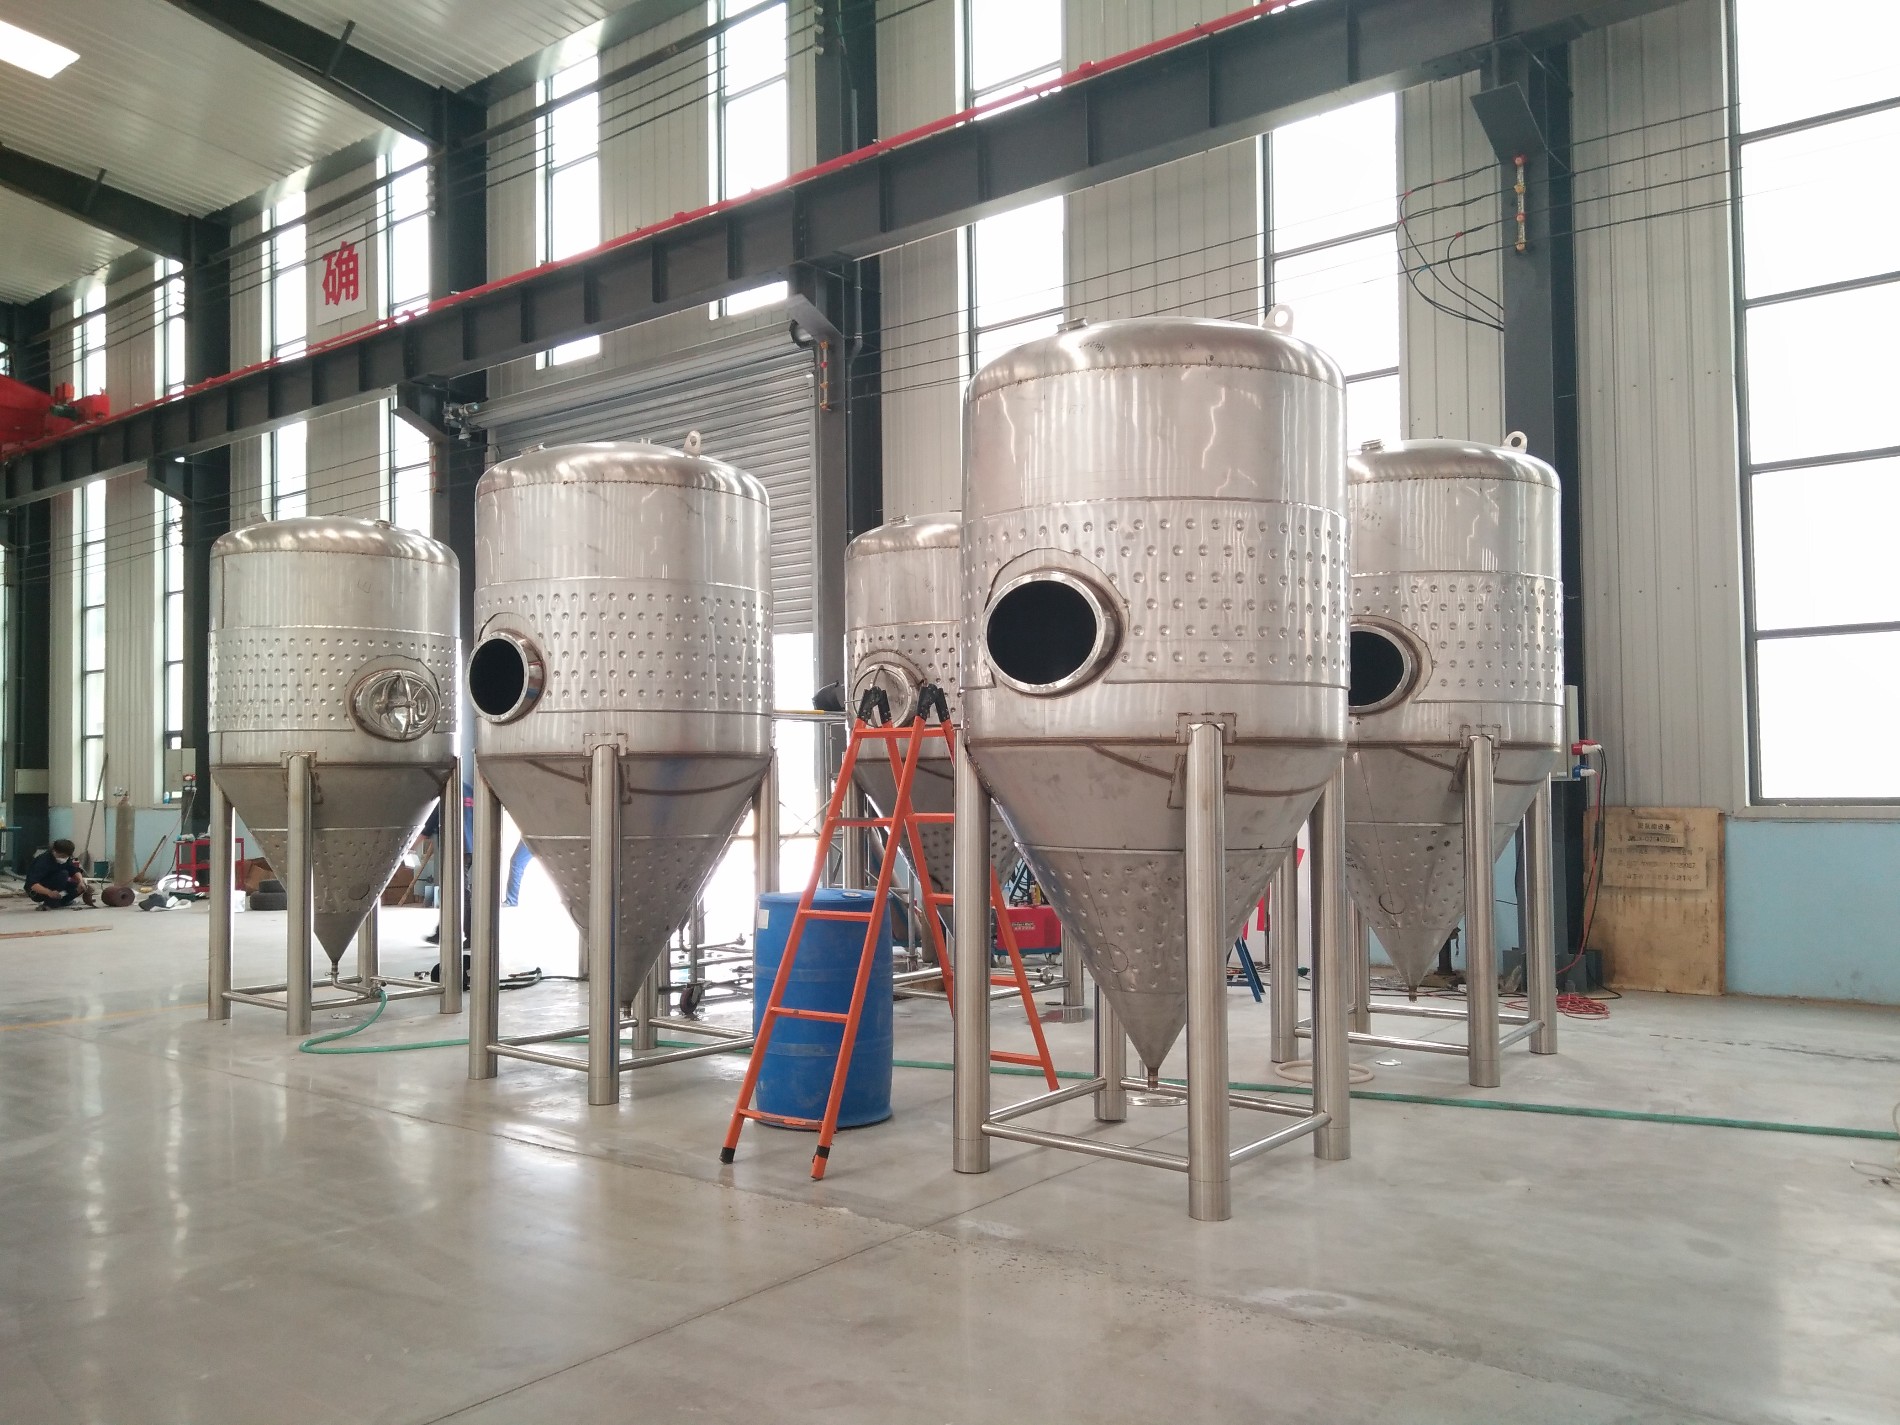 1000L Micro Beer Equipment/Beer Brewing Equipment/Brewery System for Restaurant, Bar